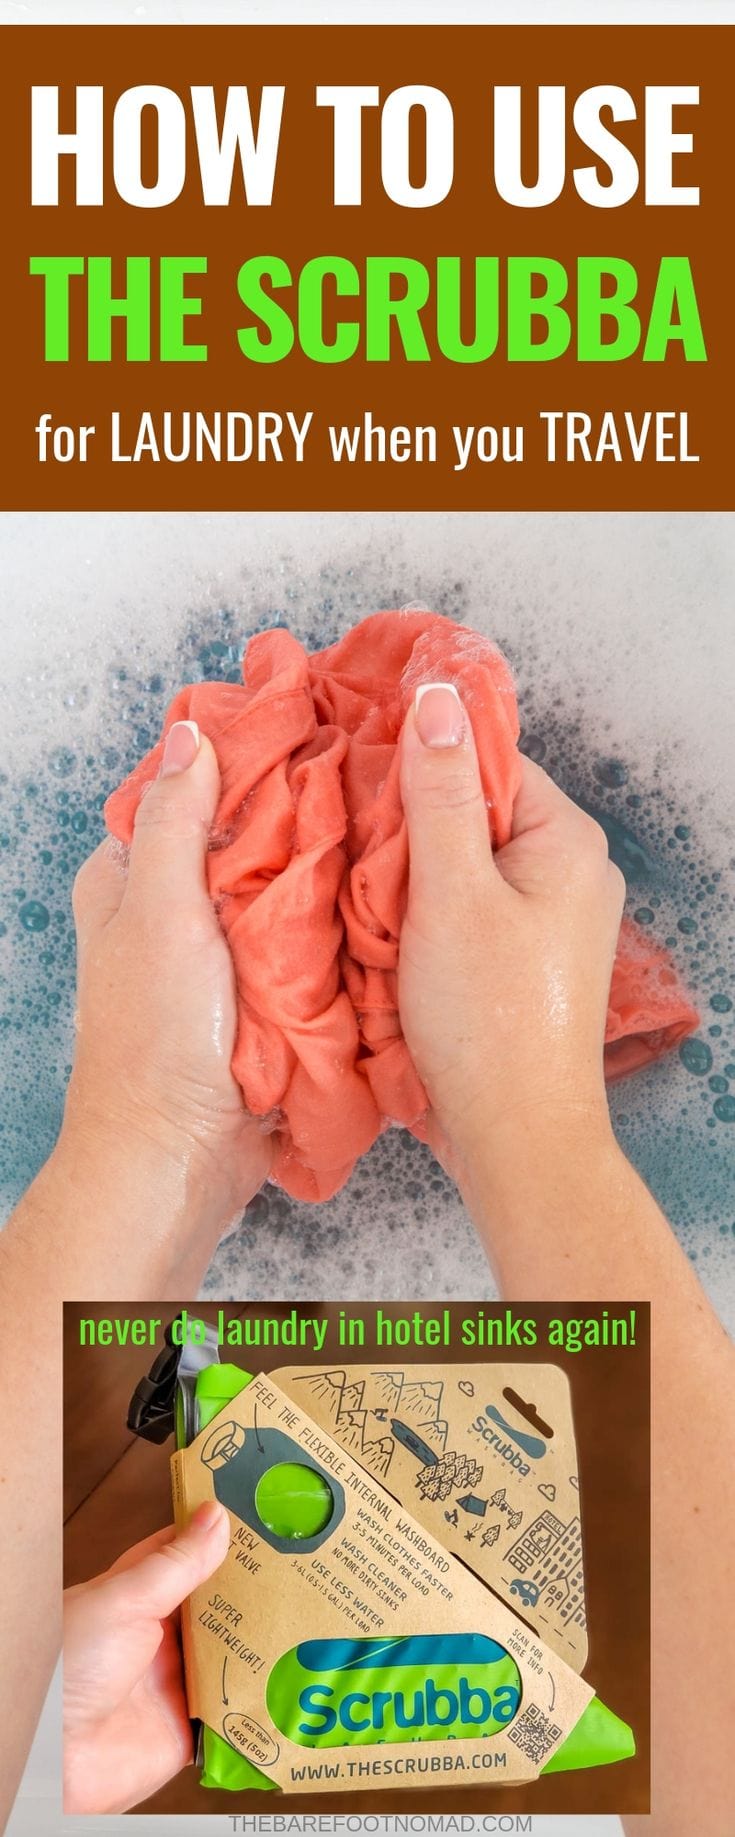 How to use the Scrubba wash bag to do laundry when you travel 